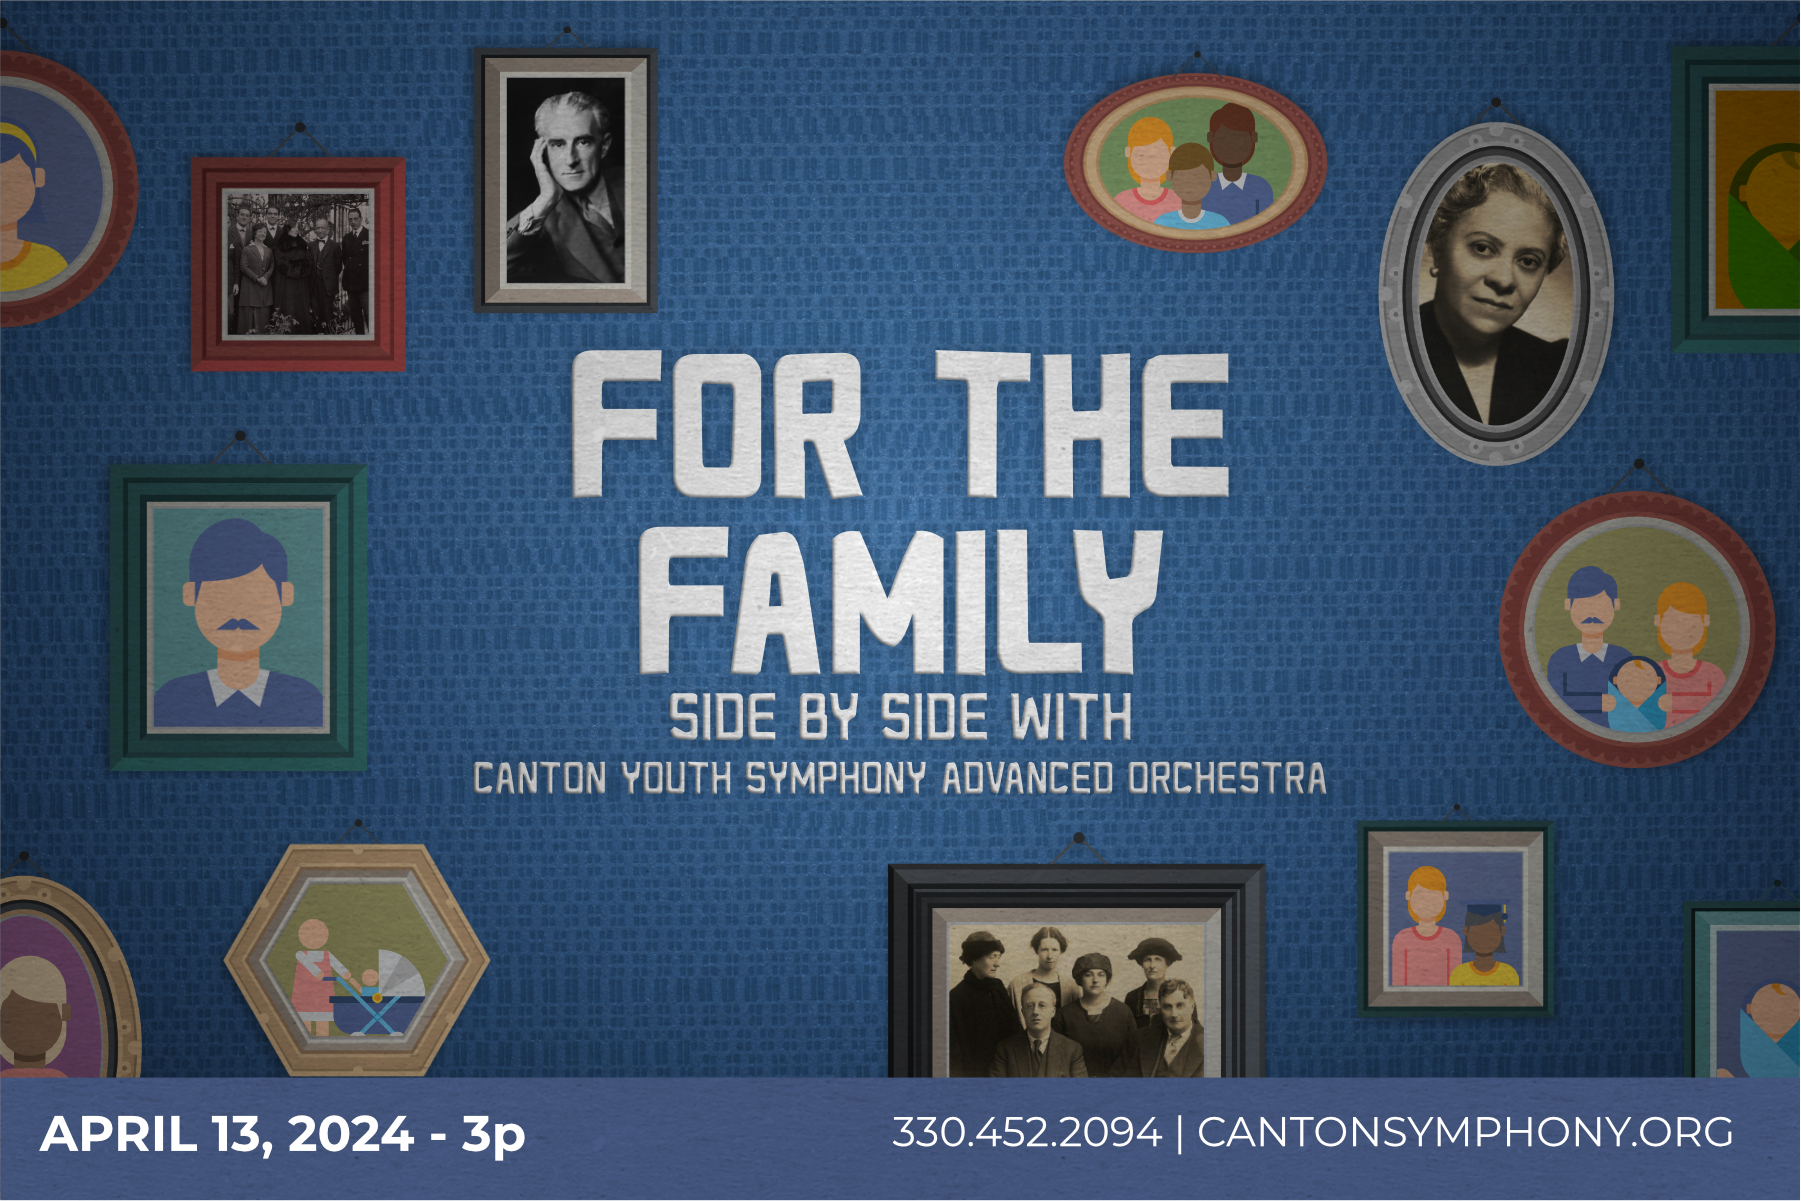 A graphic depicting an average family's photo wall, complete with frames including various types of families. Mixed race, nontraditional, and the featured composers' families are all featured. The graphic is titled "For the Family: Side by side with the Canton Youth Symphony Advanced Orchestra."